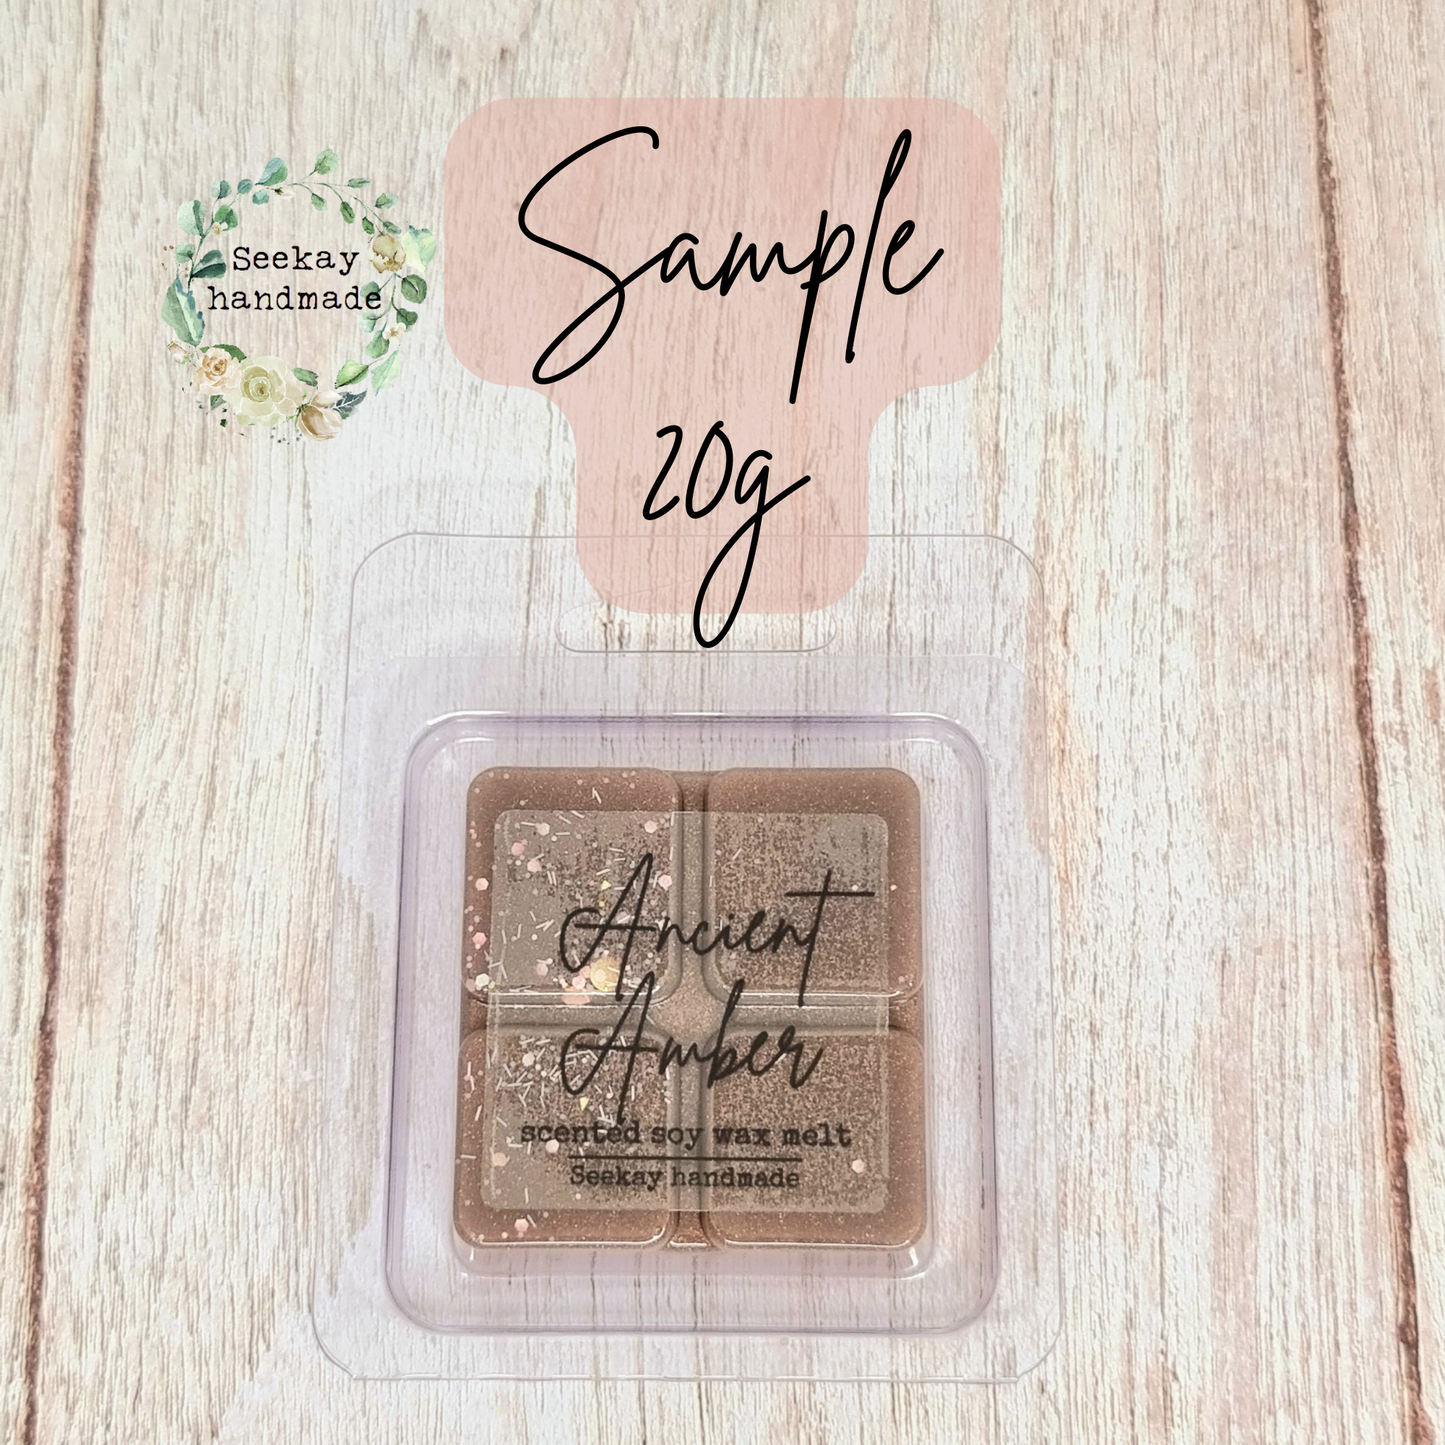 Ancient Amber scented soy wax melt